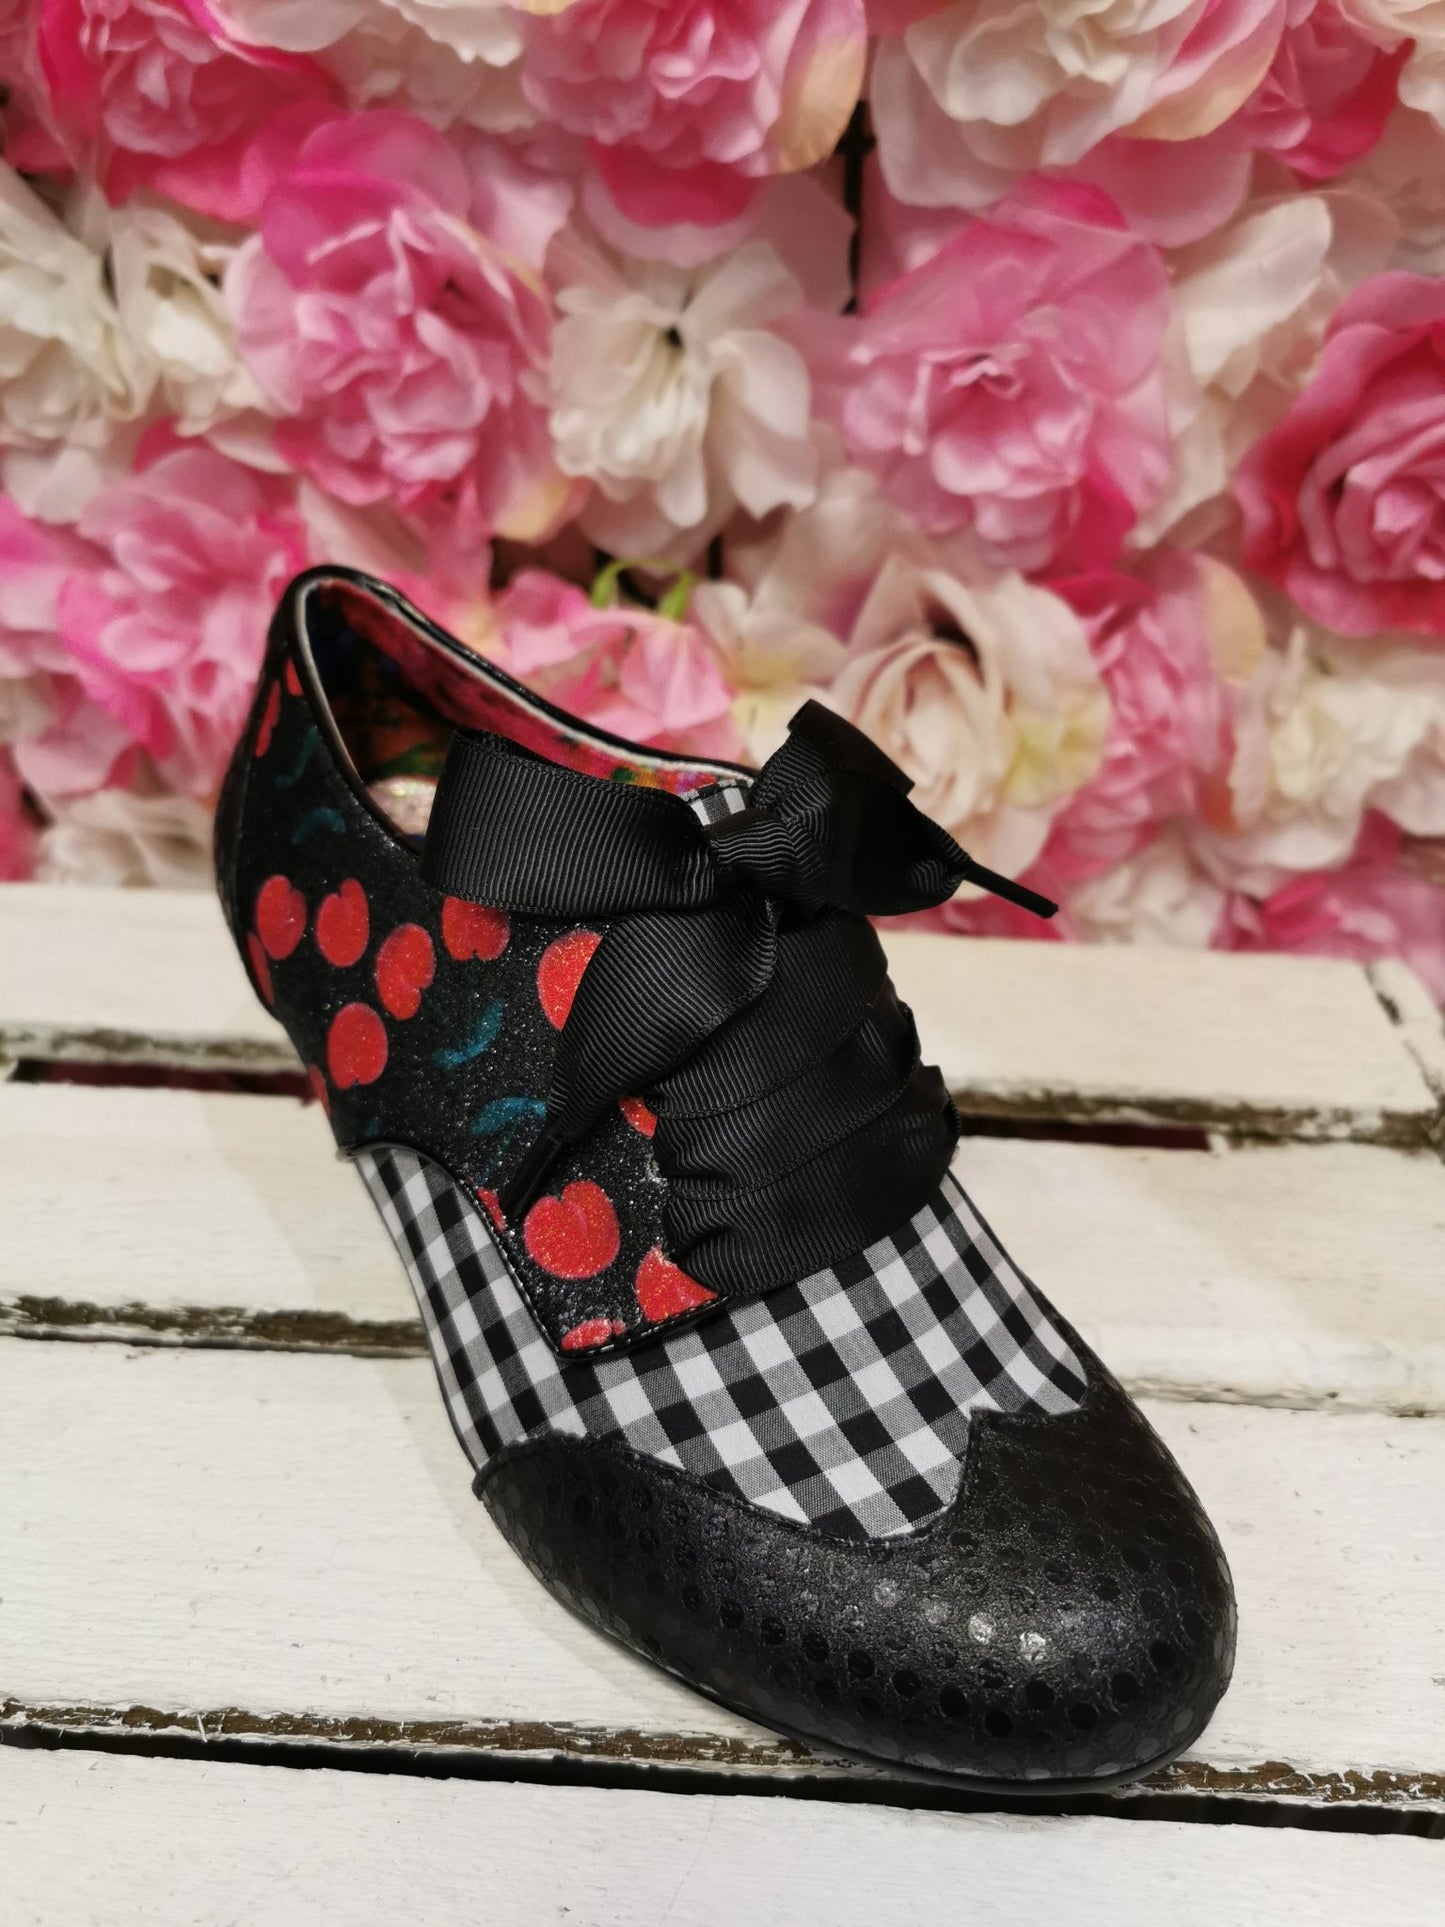 End of Story Blk/Red Irregular Choice - Rockamilly-Shoes-Vintage